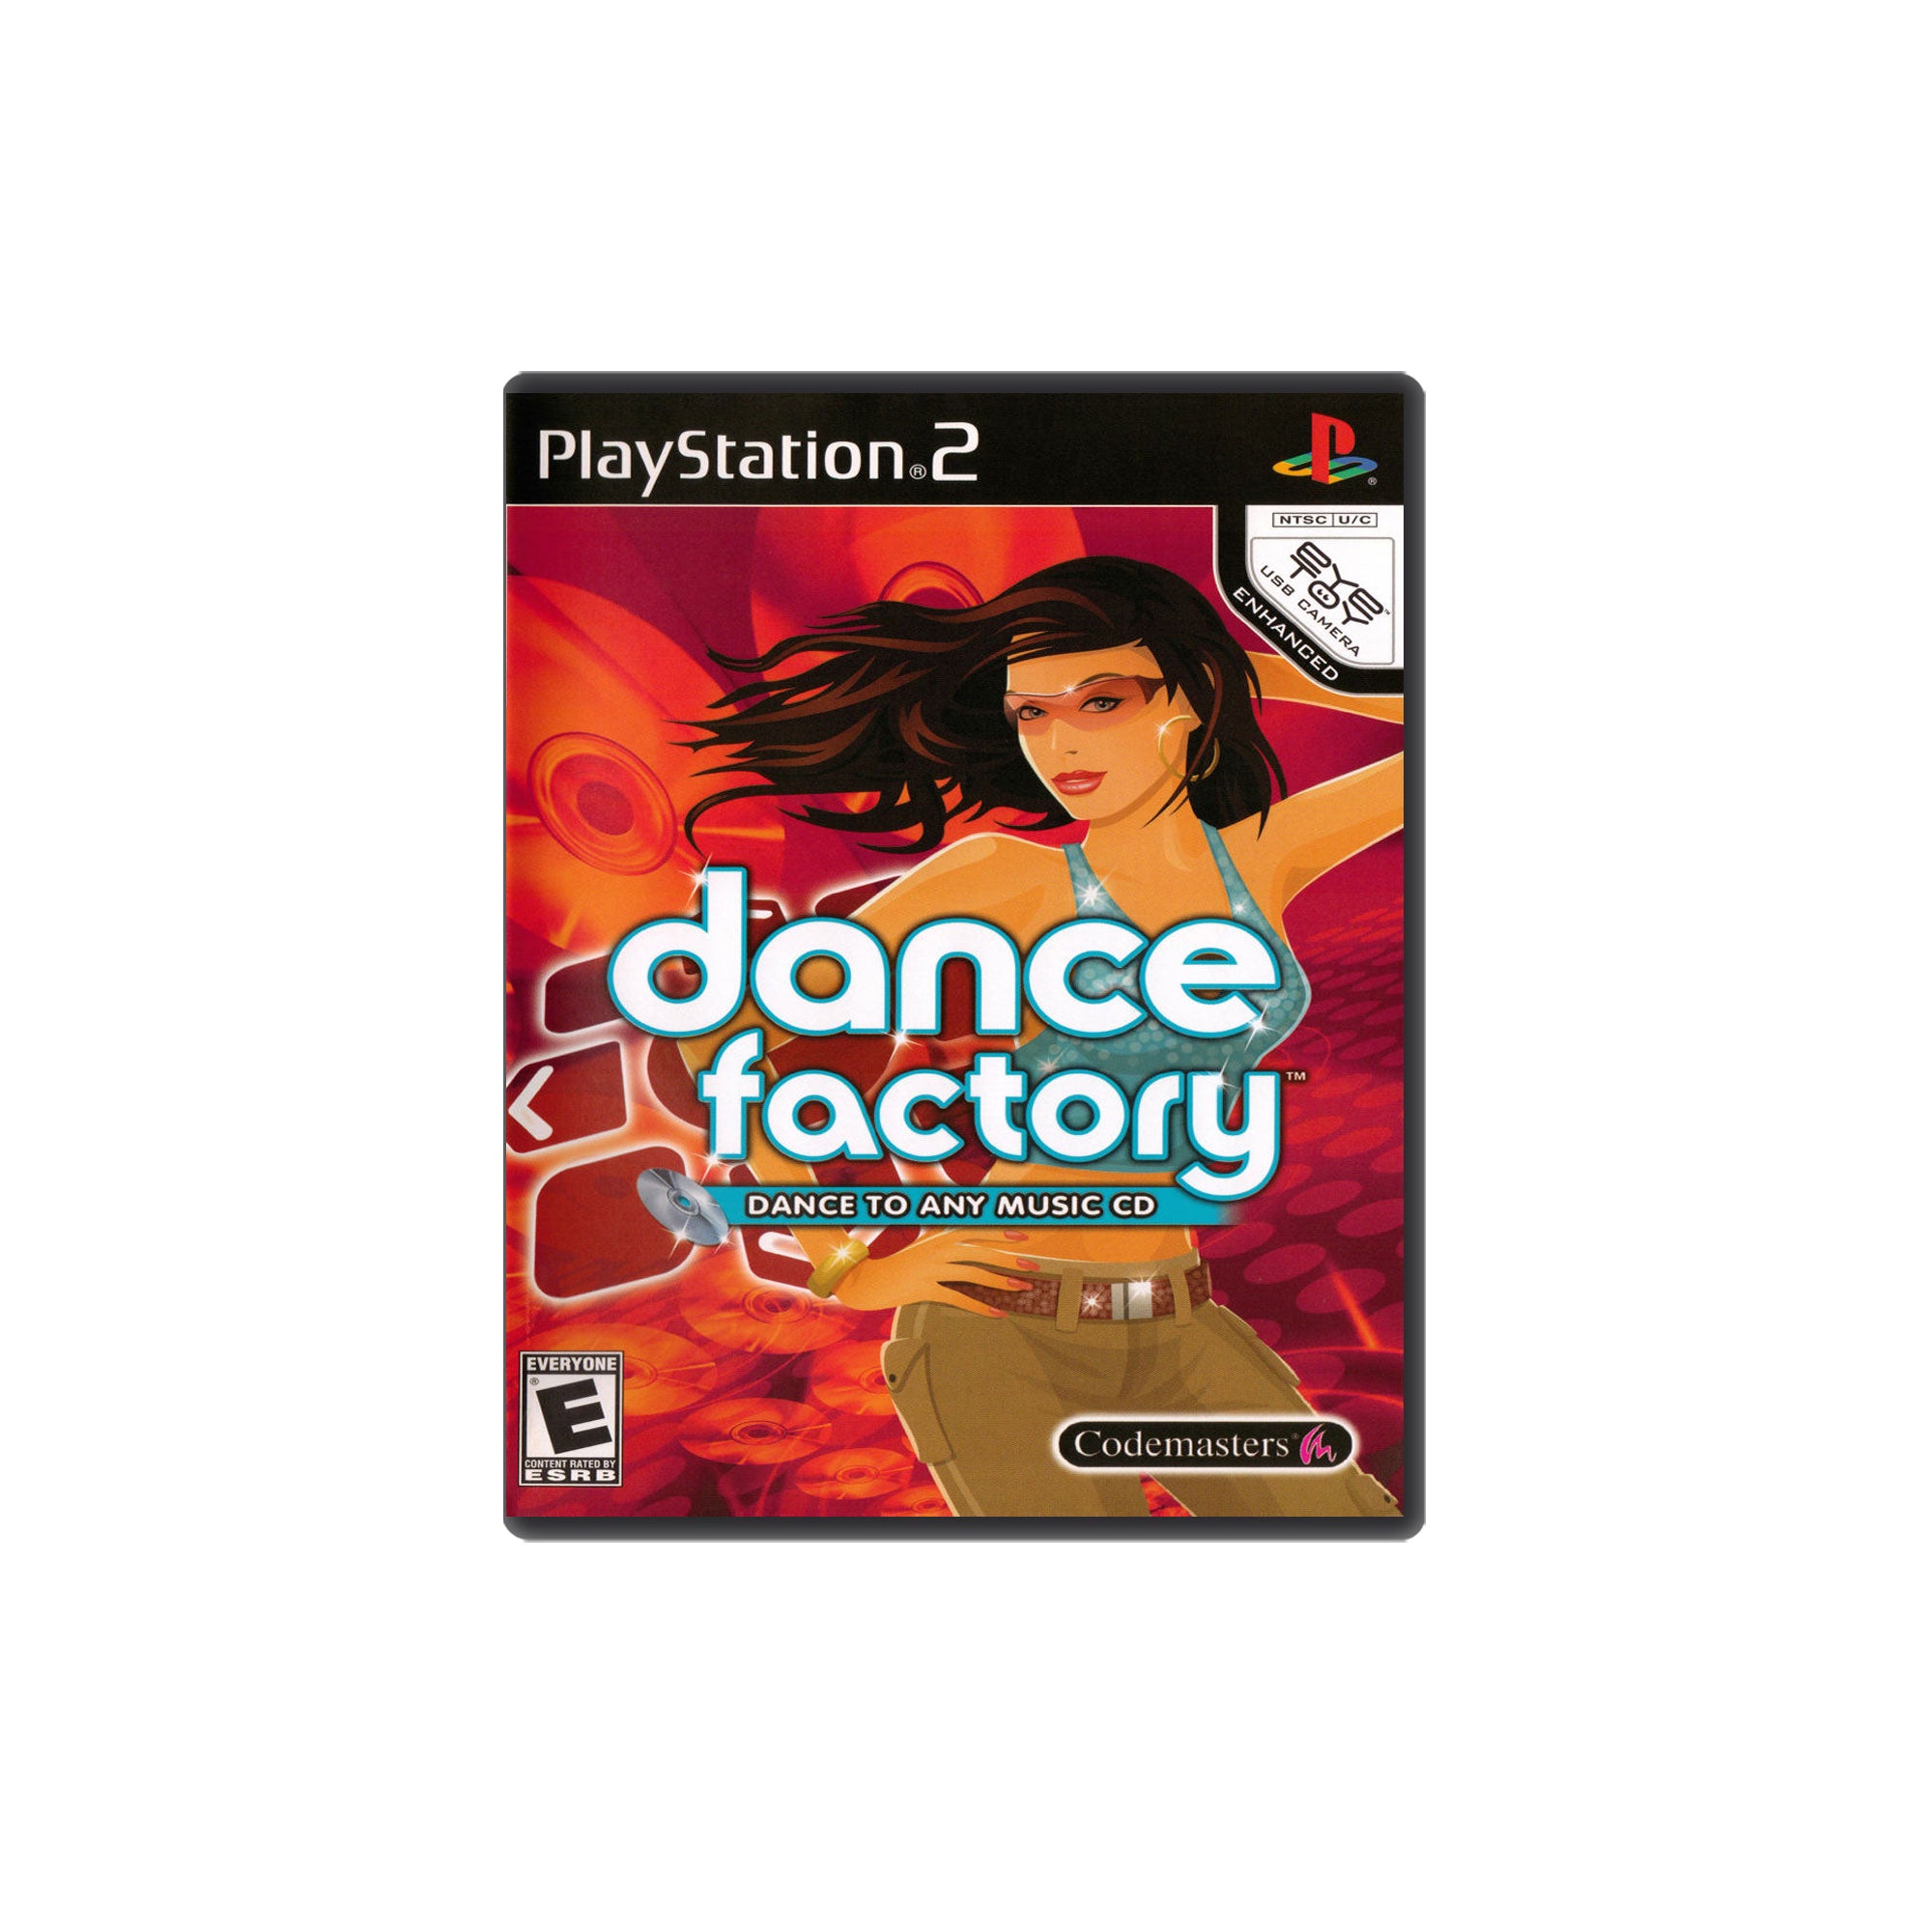 Swifty Games - Dance Factory (Playstation 2, 2007)